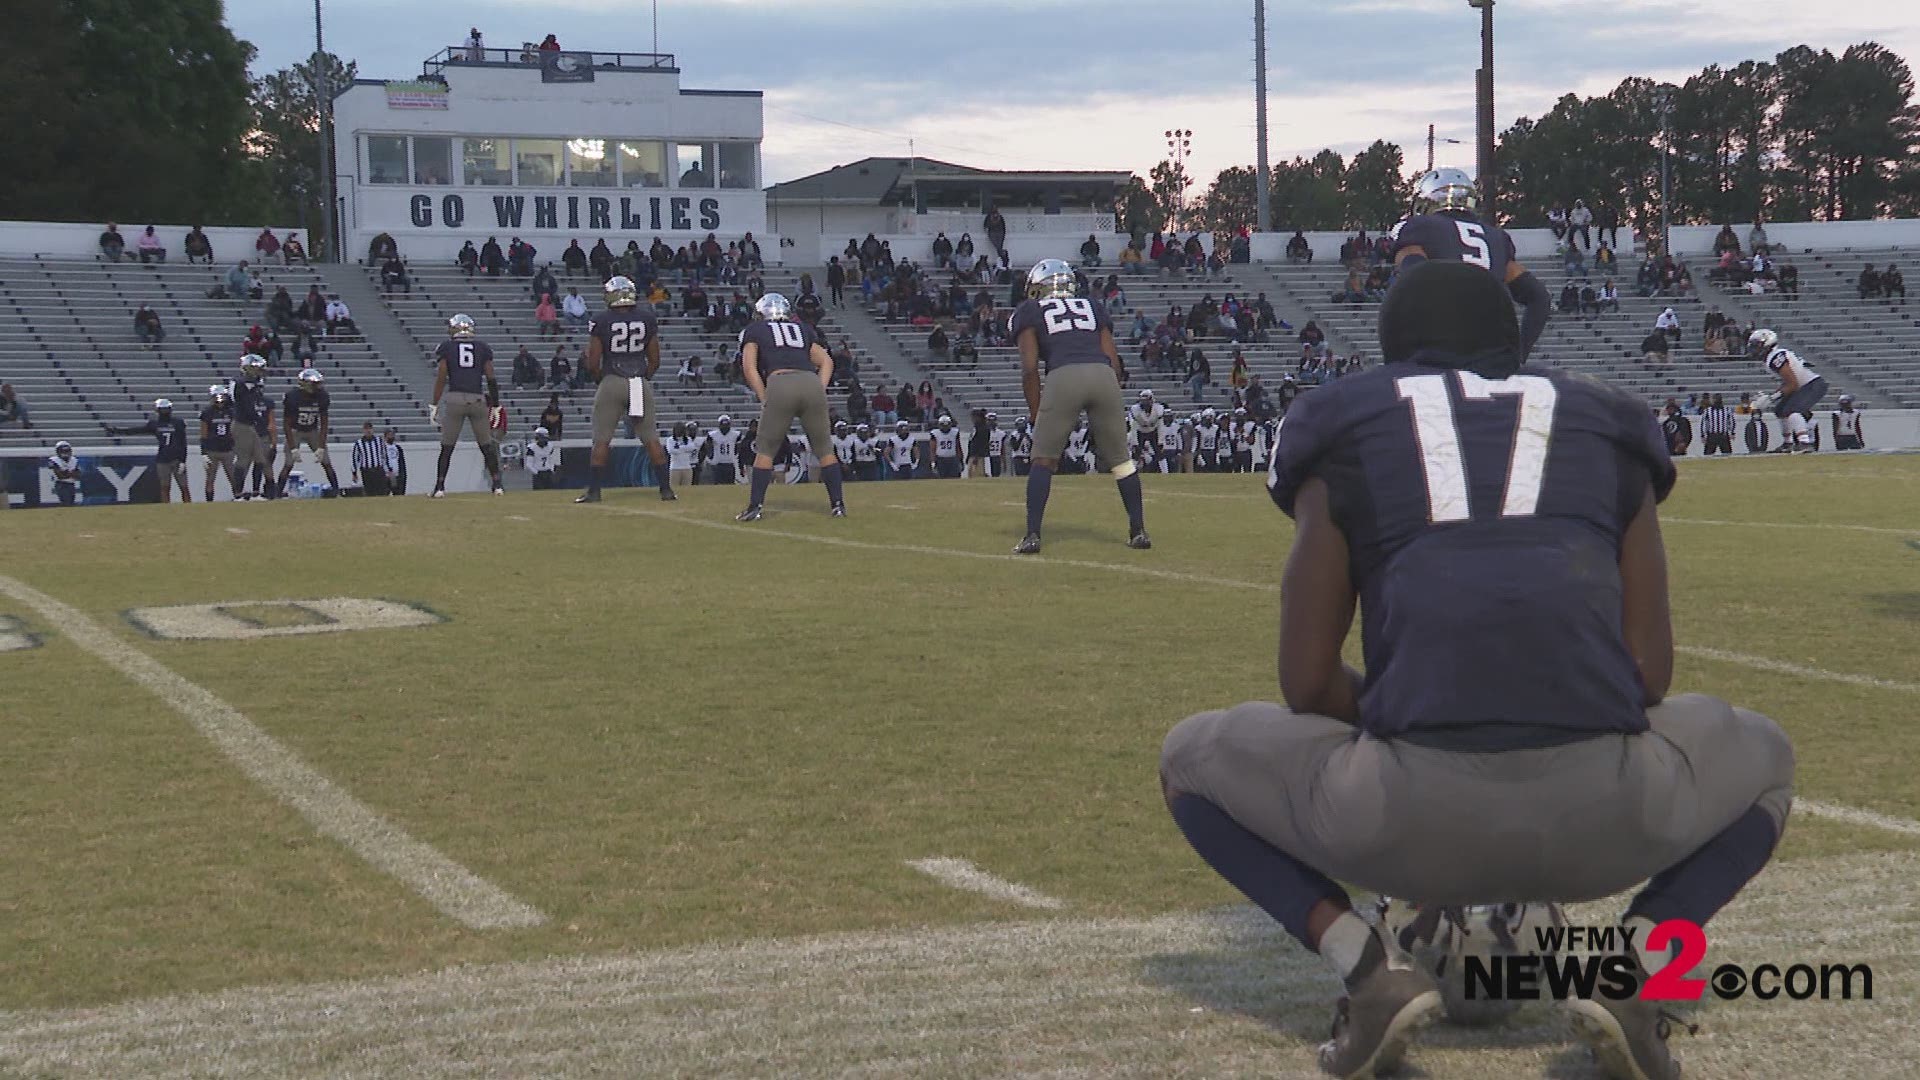 Grimsley wins 42-7. The Whirlies will take on Butler in the 4A West Regional Final.